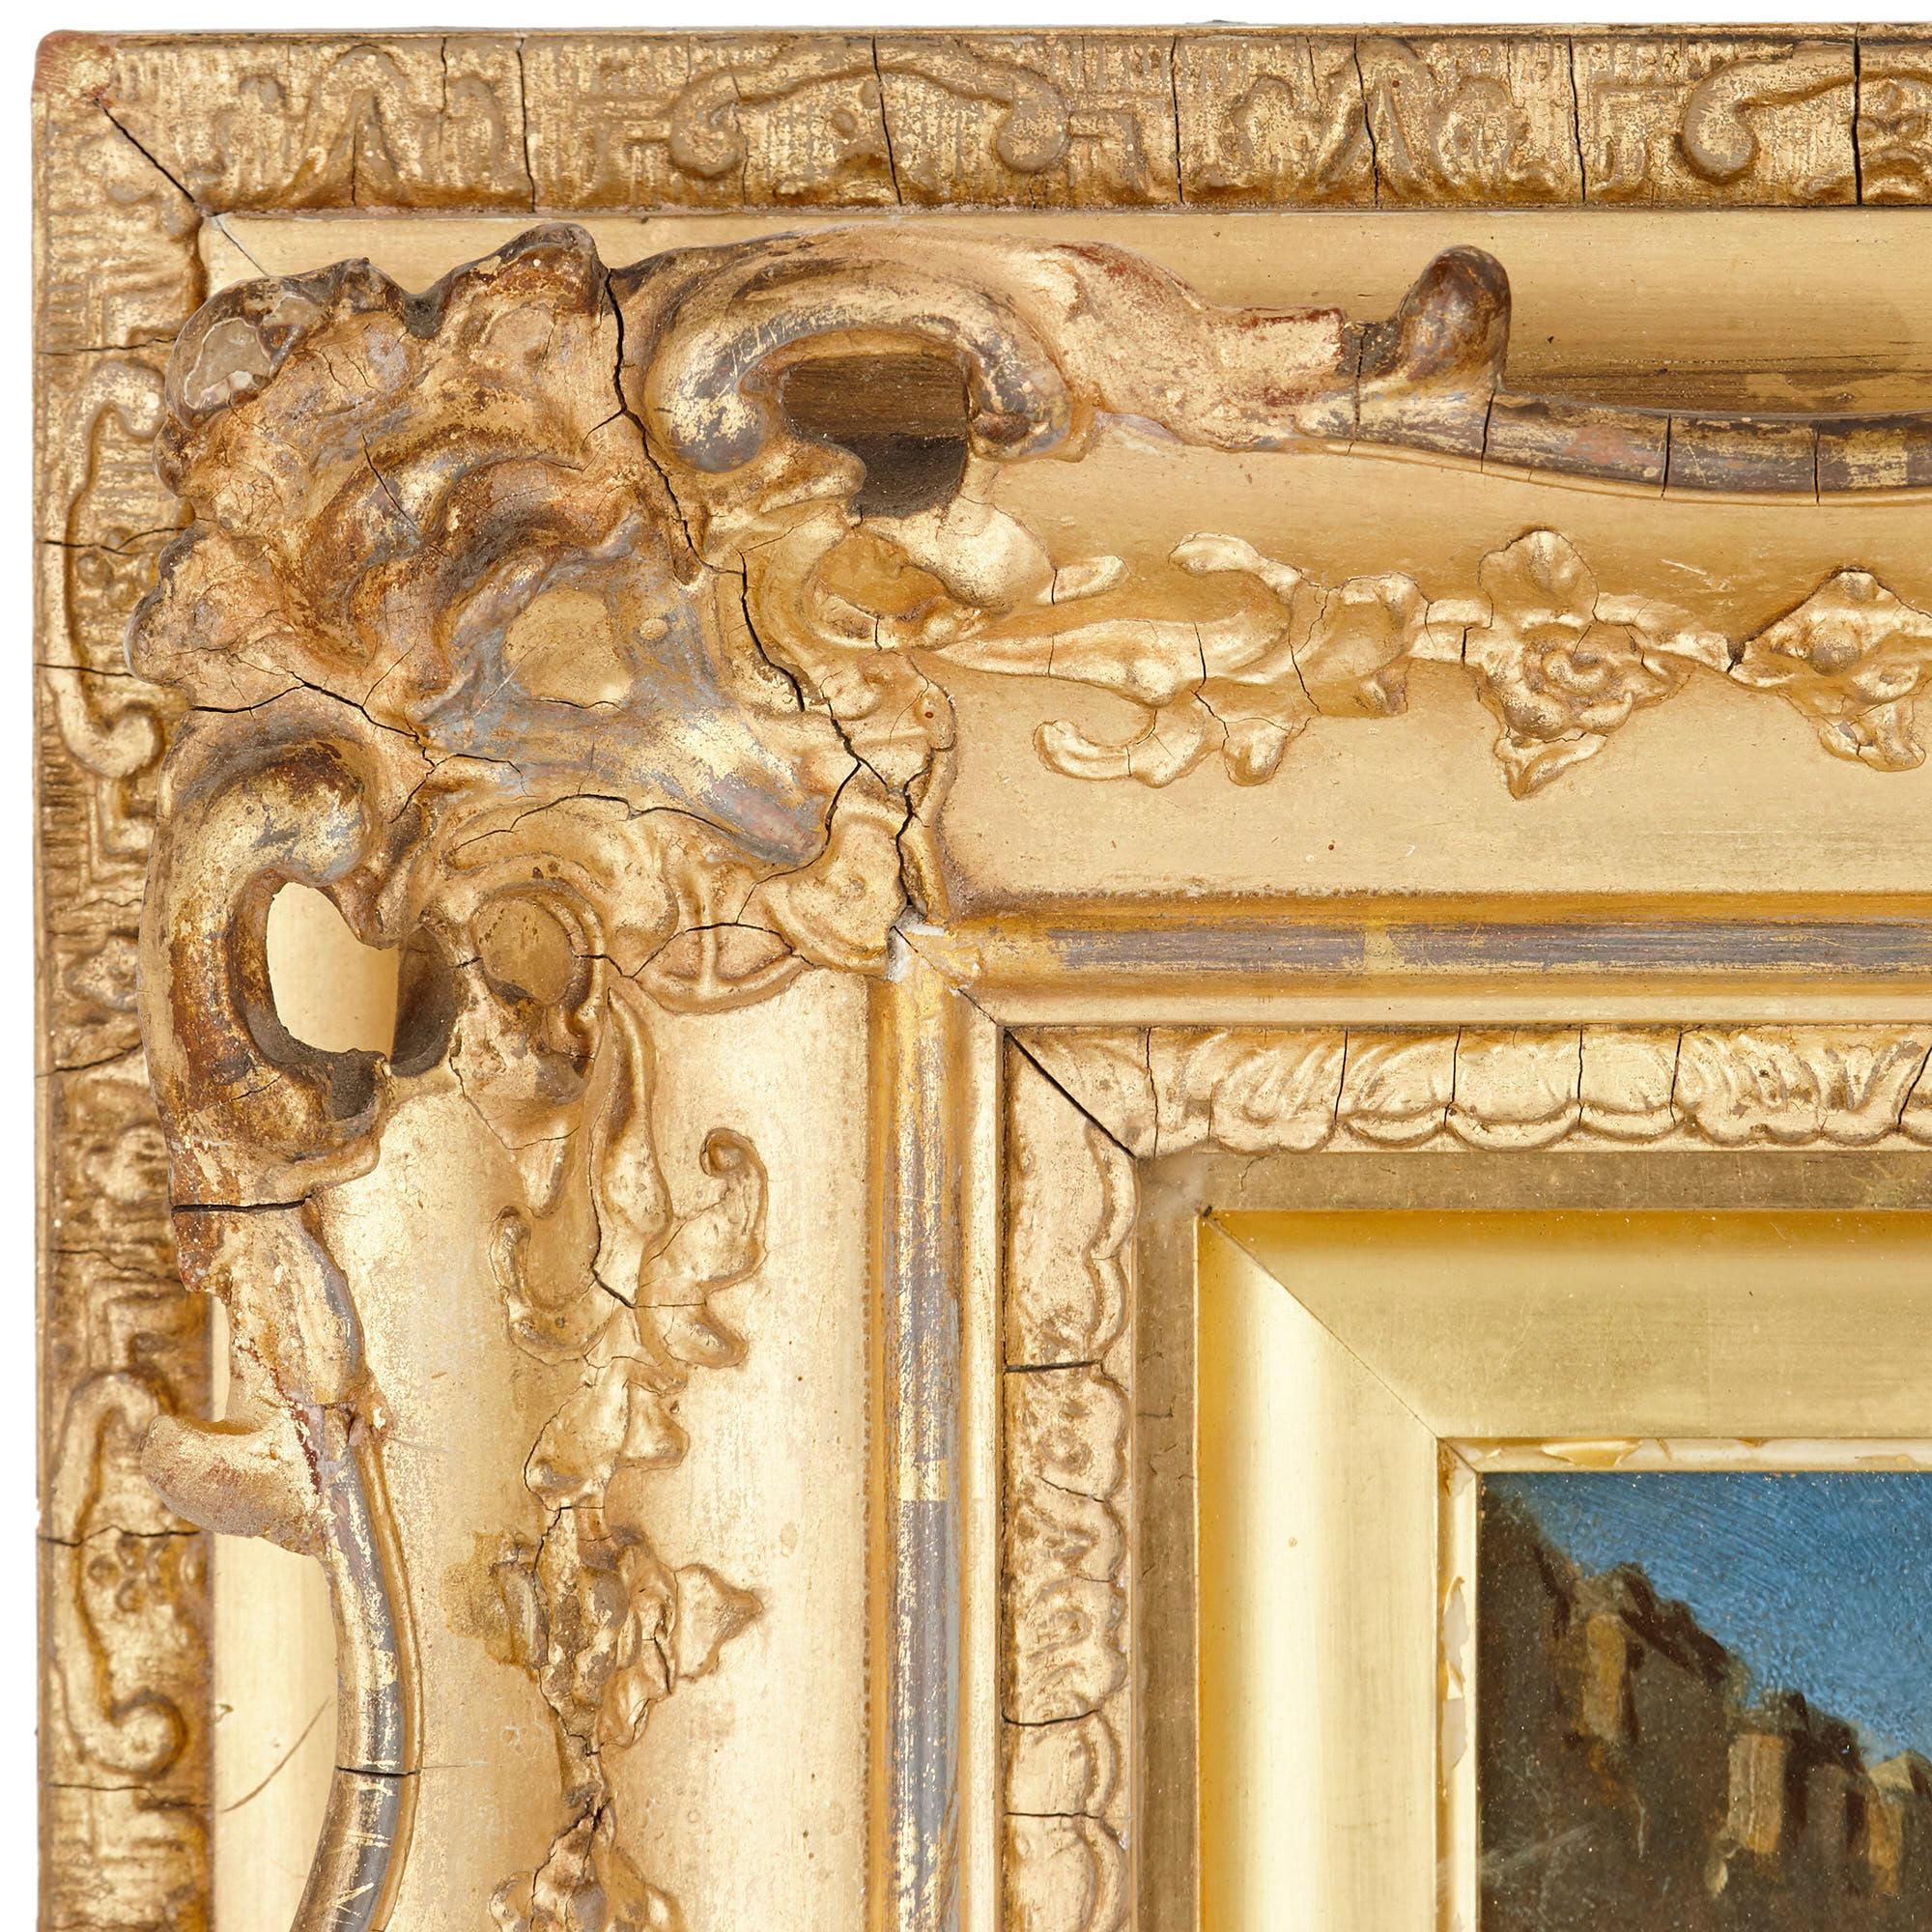 Oil on panel painting of market in giltwood frame by Eeckhout  - Naturalistic Painting by Victor Eeckhout